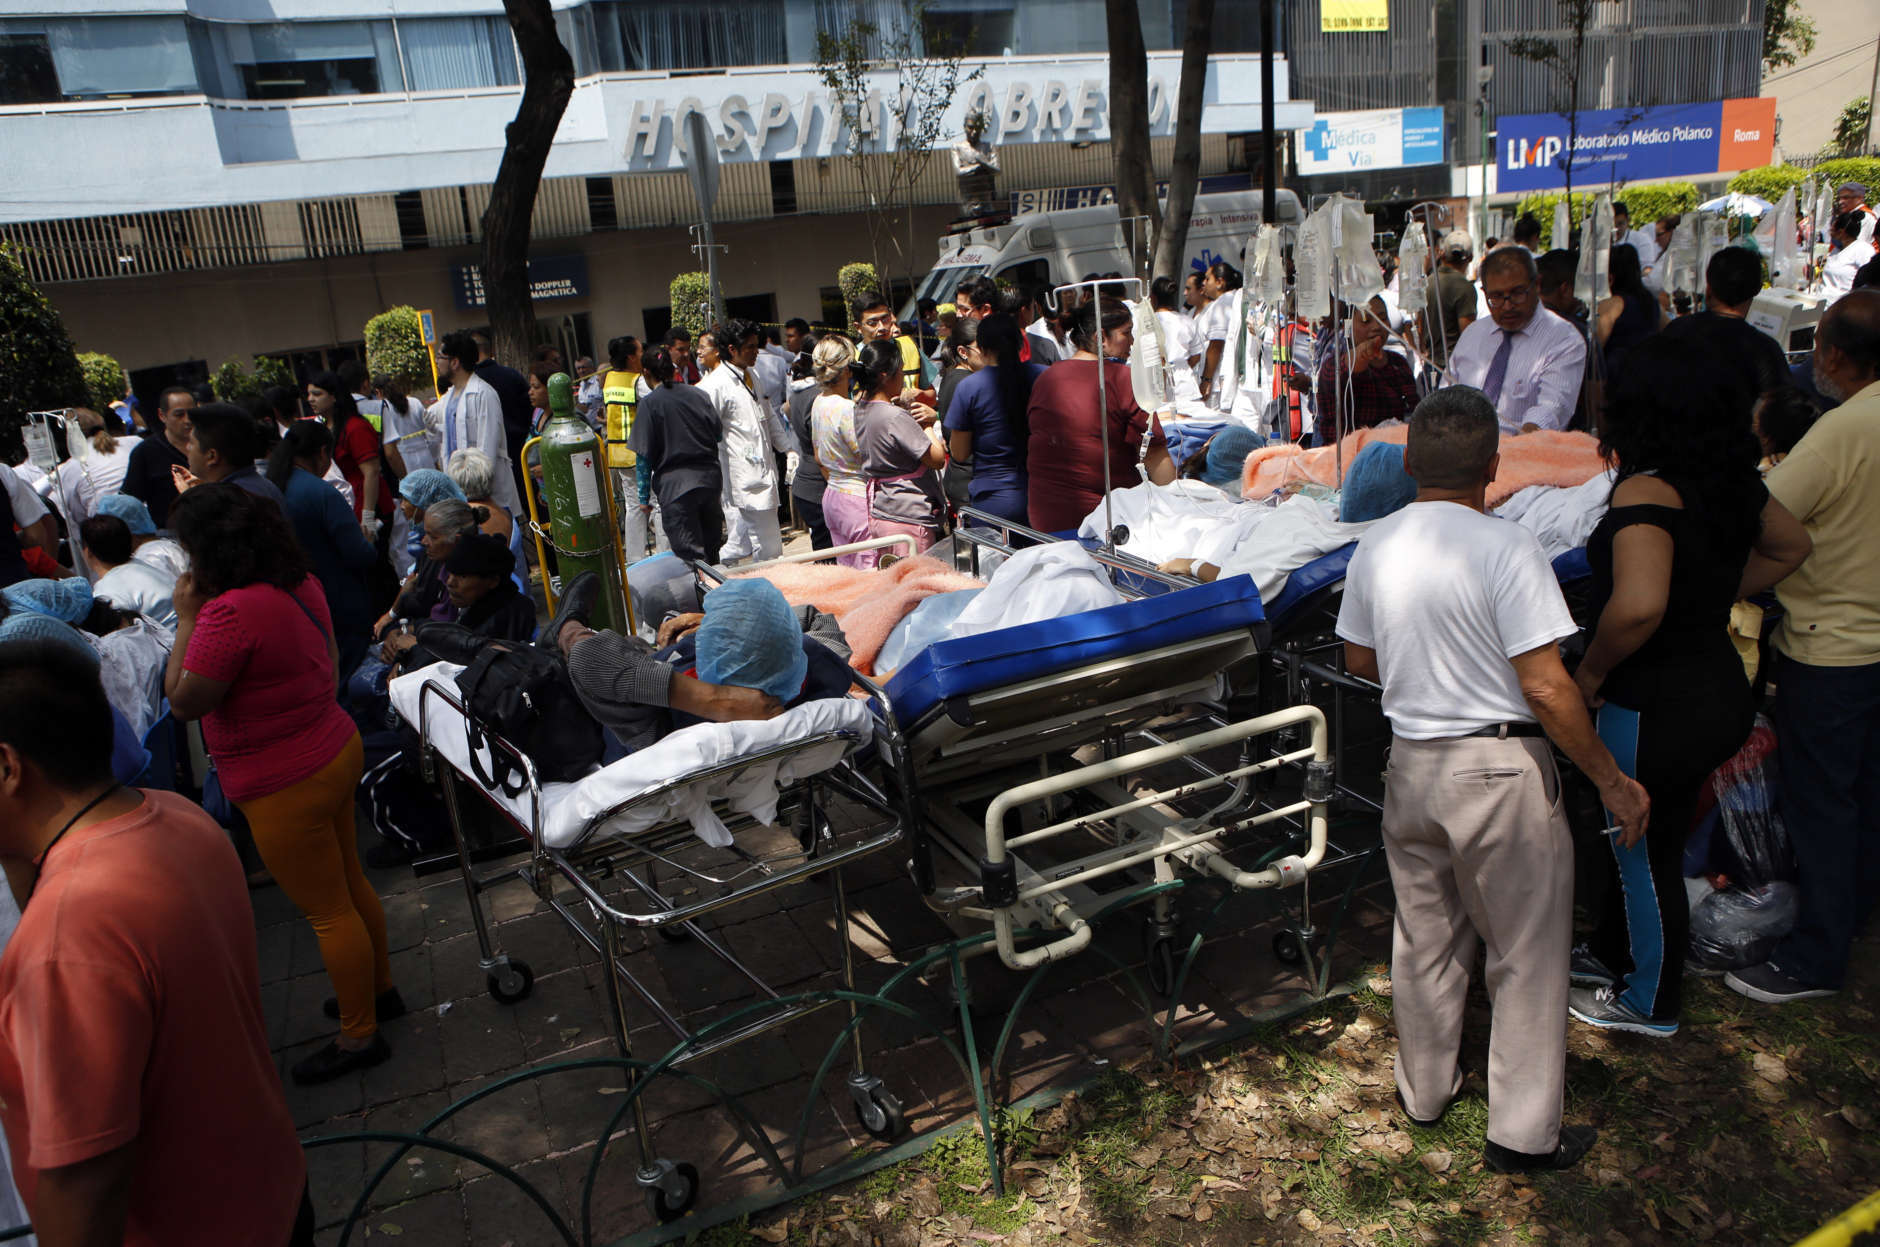 CORRECTS BYLINE - Patients lie on their hospital beds after being evacuated following an earthquake in Mexico City, Tuesday, Sept. 19, 2017. A powerful earthquake jolted central Mexico on Tuesday, causing buildings to sway sickeningly in the capital on the anniversary of a 1985 quake that did major damage. (AP Photo/Rebecca Blackwell)